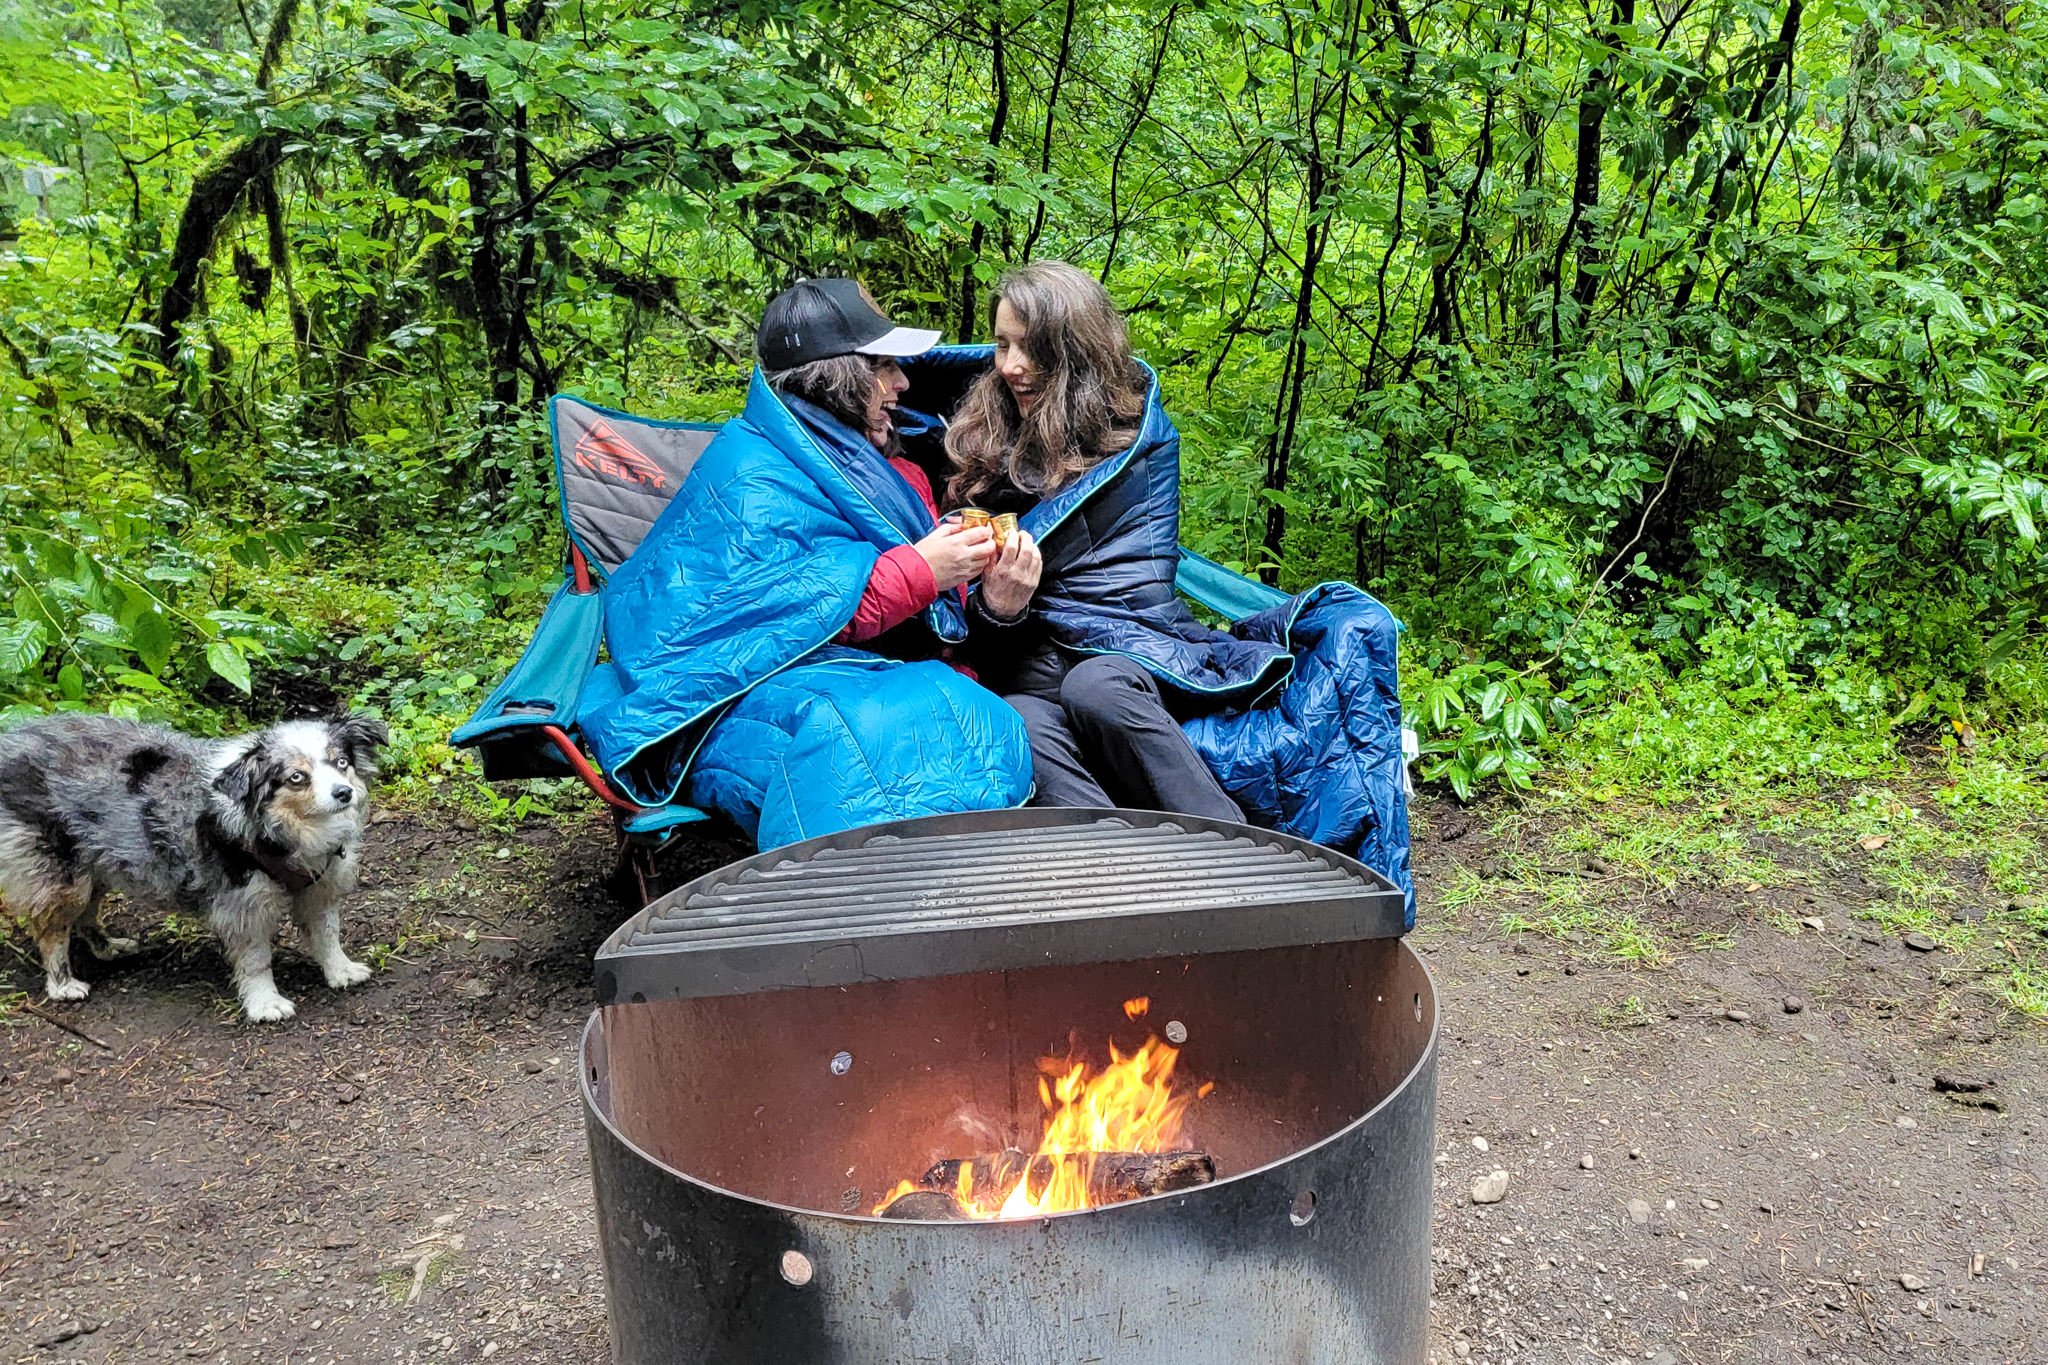 Two women using the Rumpl Original Puffy while sitting around the campfire